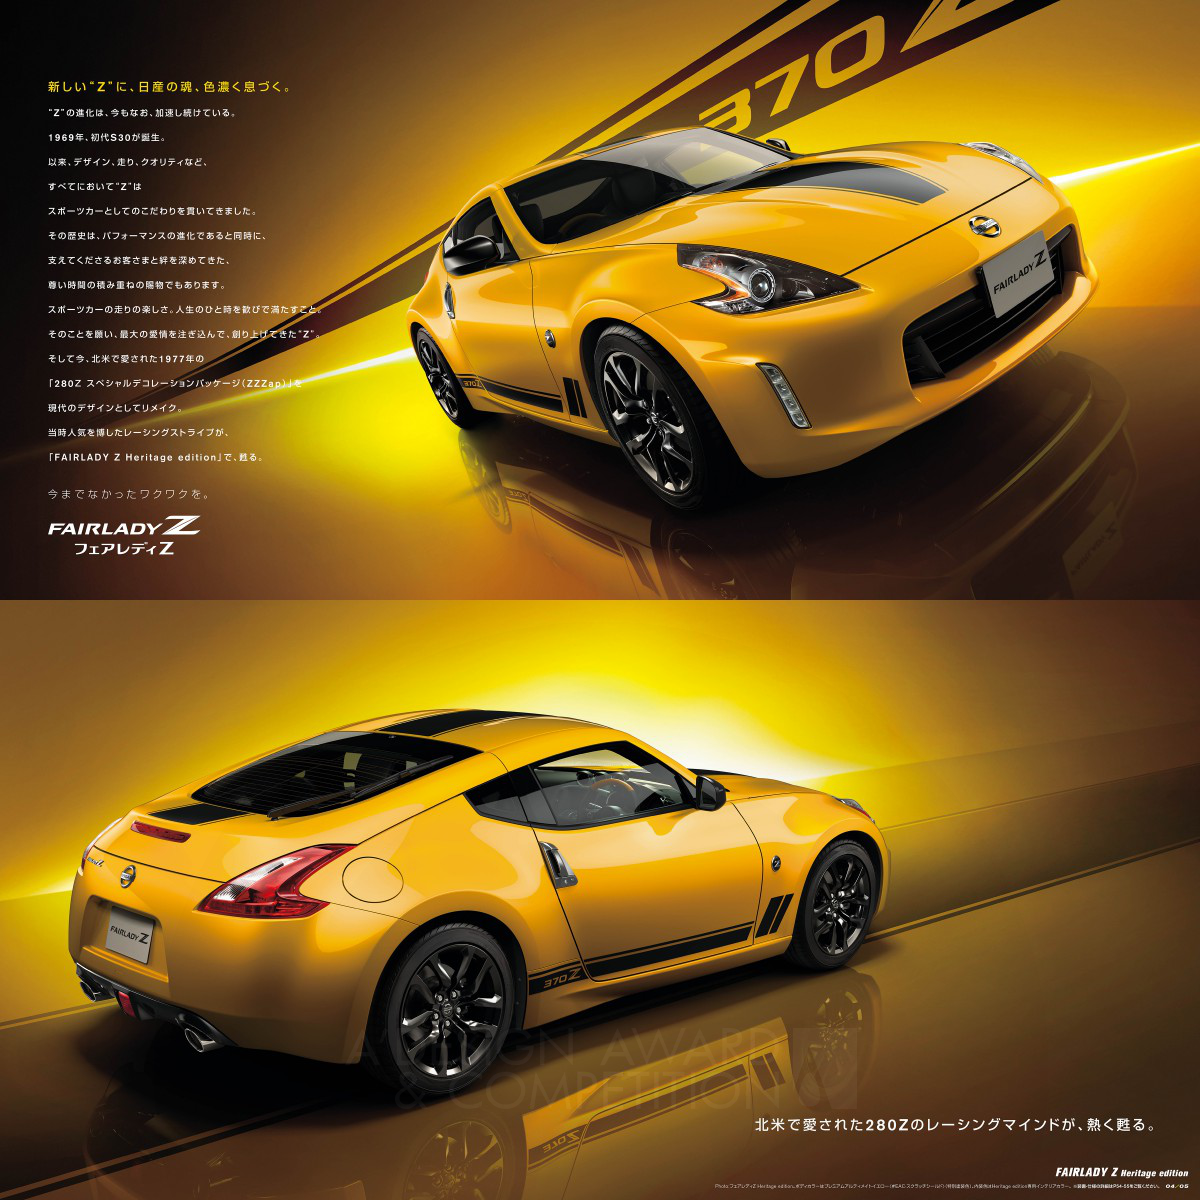 Nissan Fairlady Z Brochure by E-graphics communications